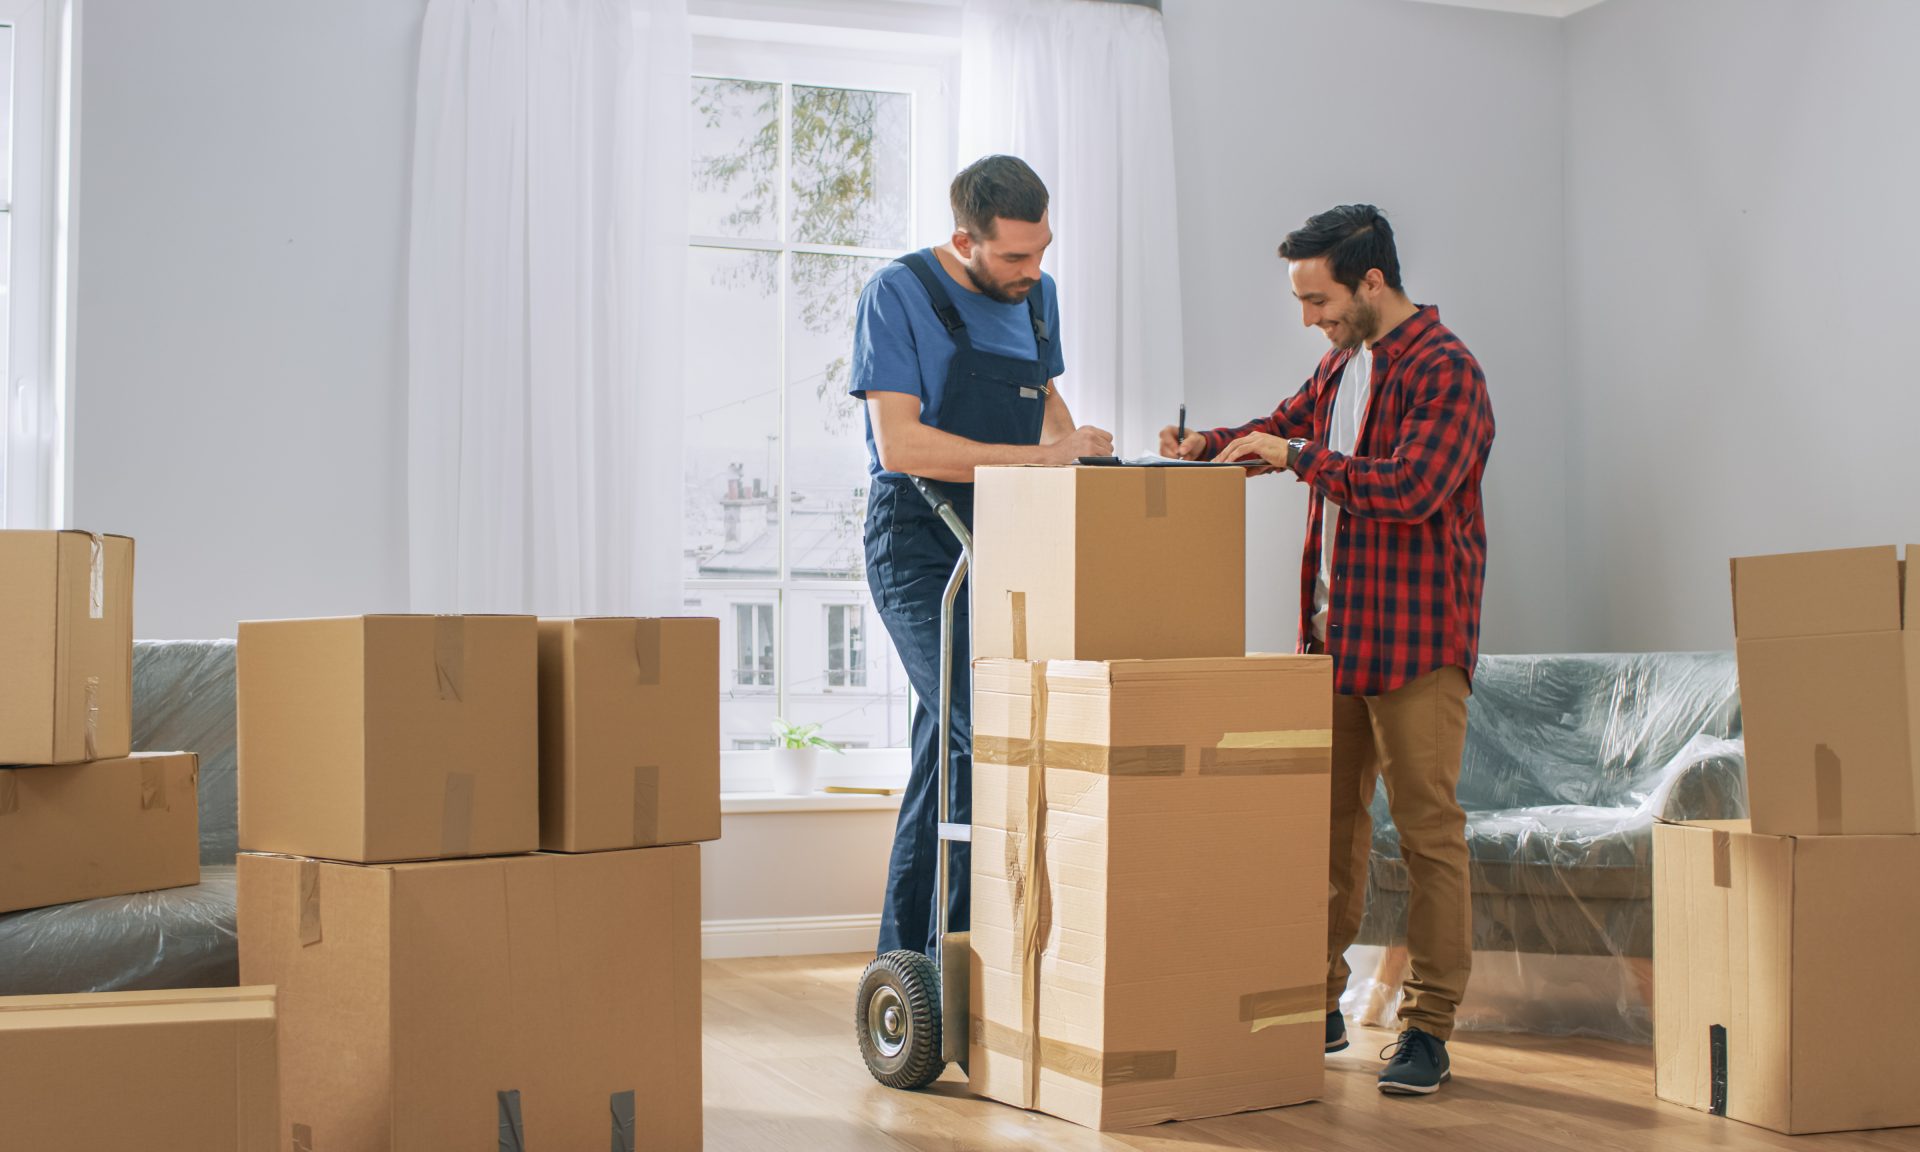 REMOVALS AND ITS PROVINCE: OUR SERVICES